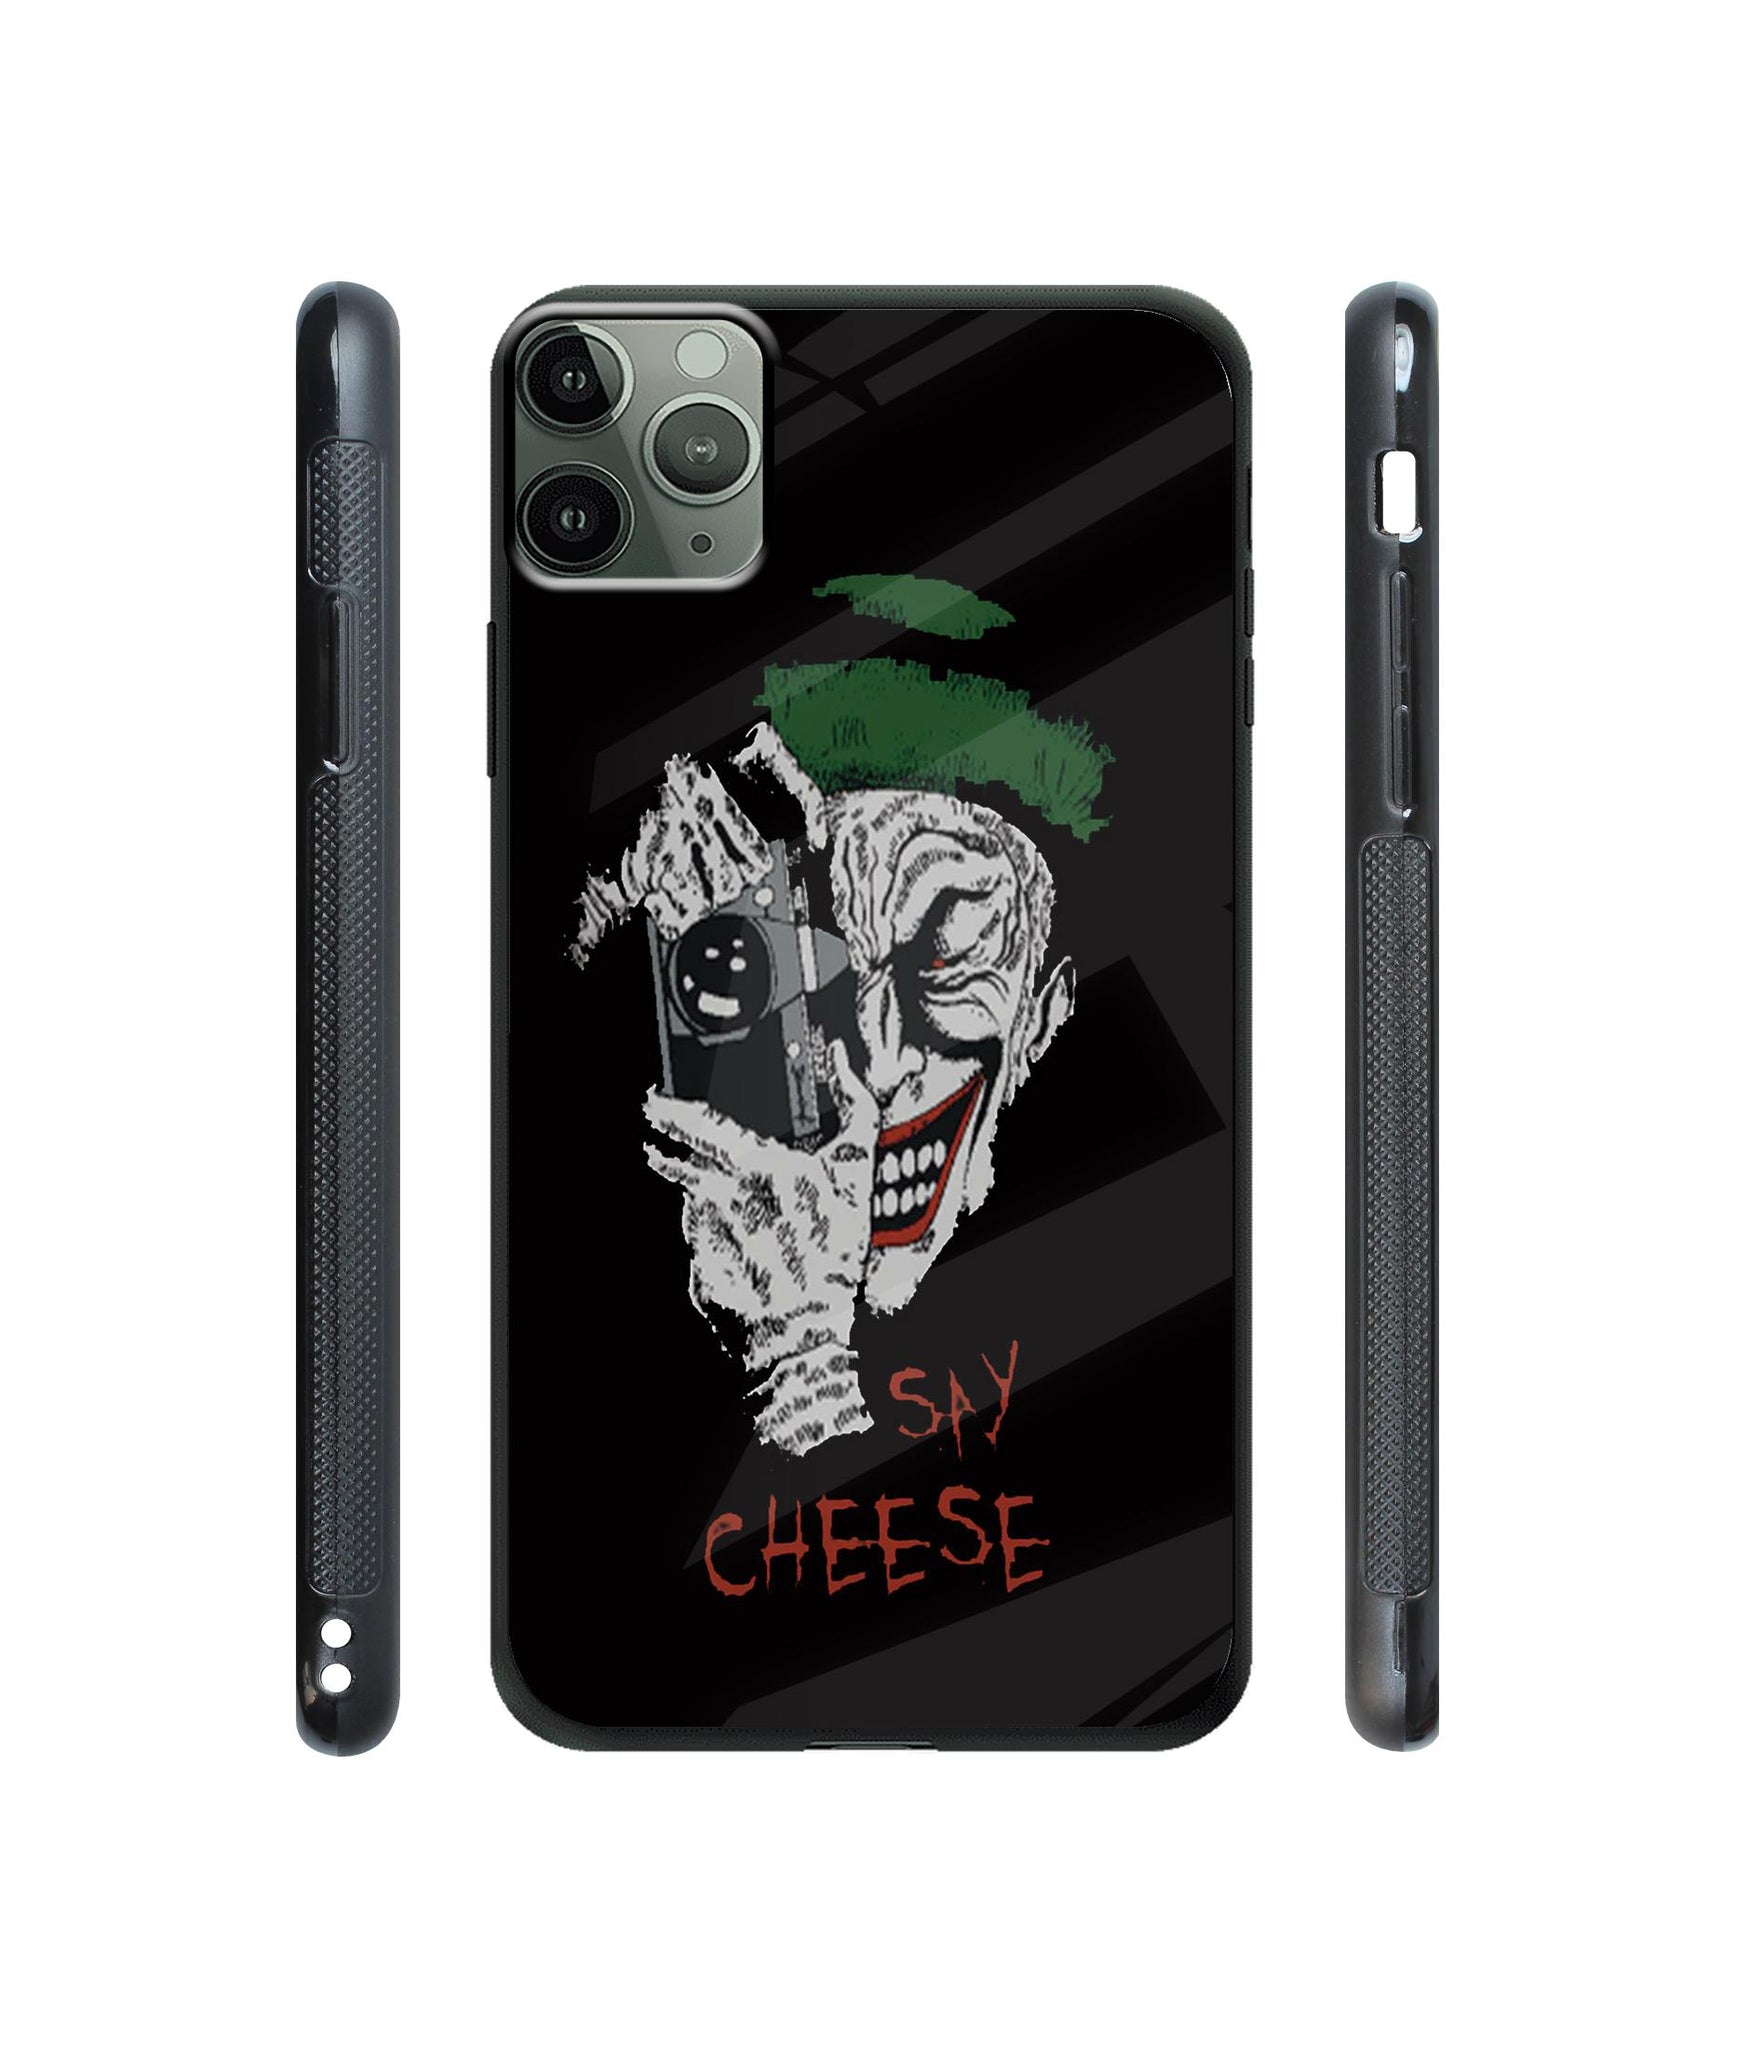 Joker Say Cheese Designer Printed Glass Cover for Apple iPhone 11 Pro Max